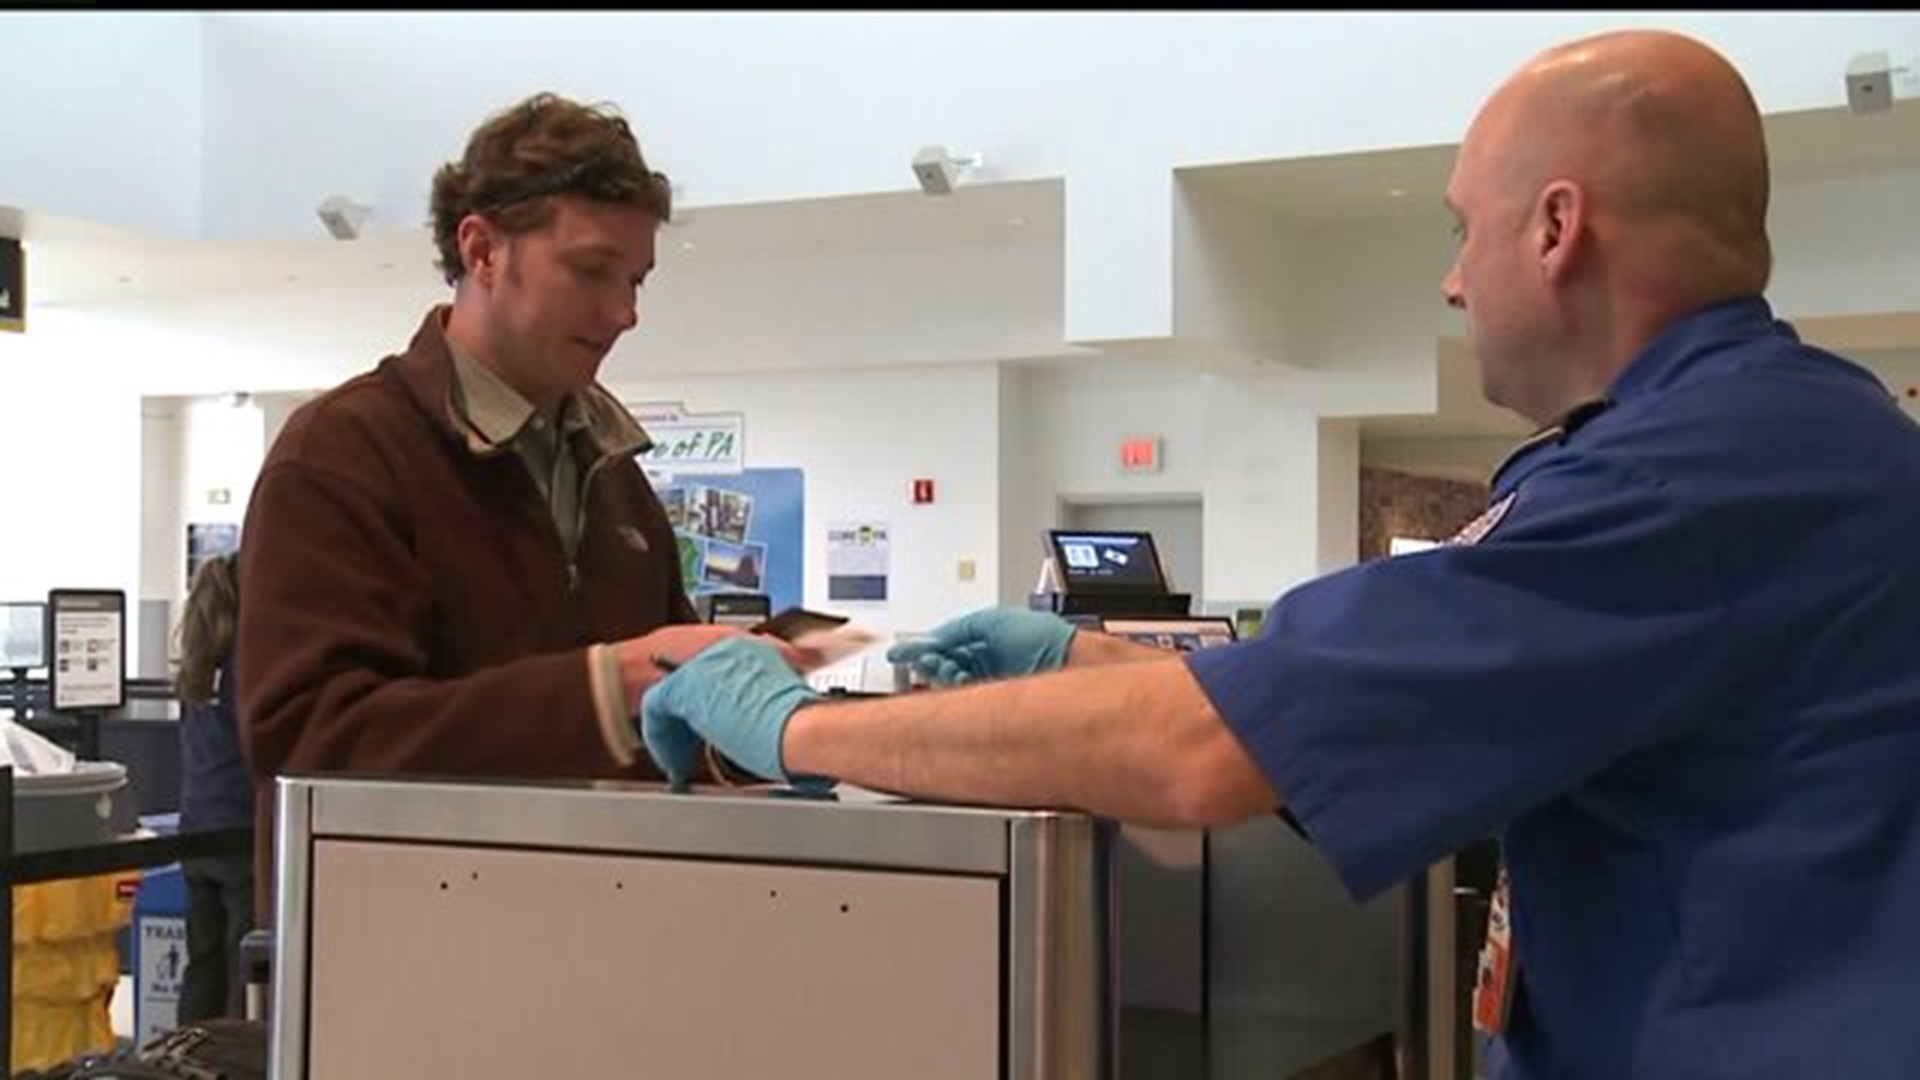 REAL ID and Pennsylvania: Why a new license may change your ability to fly